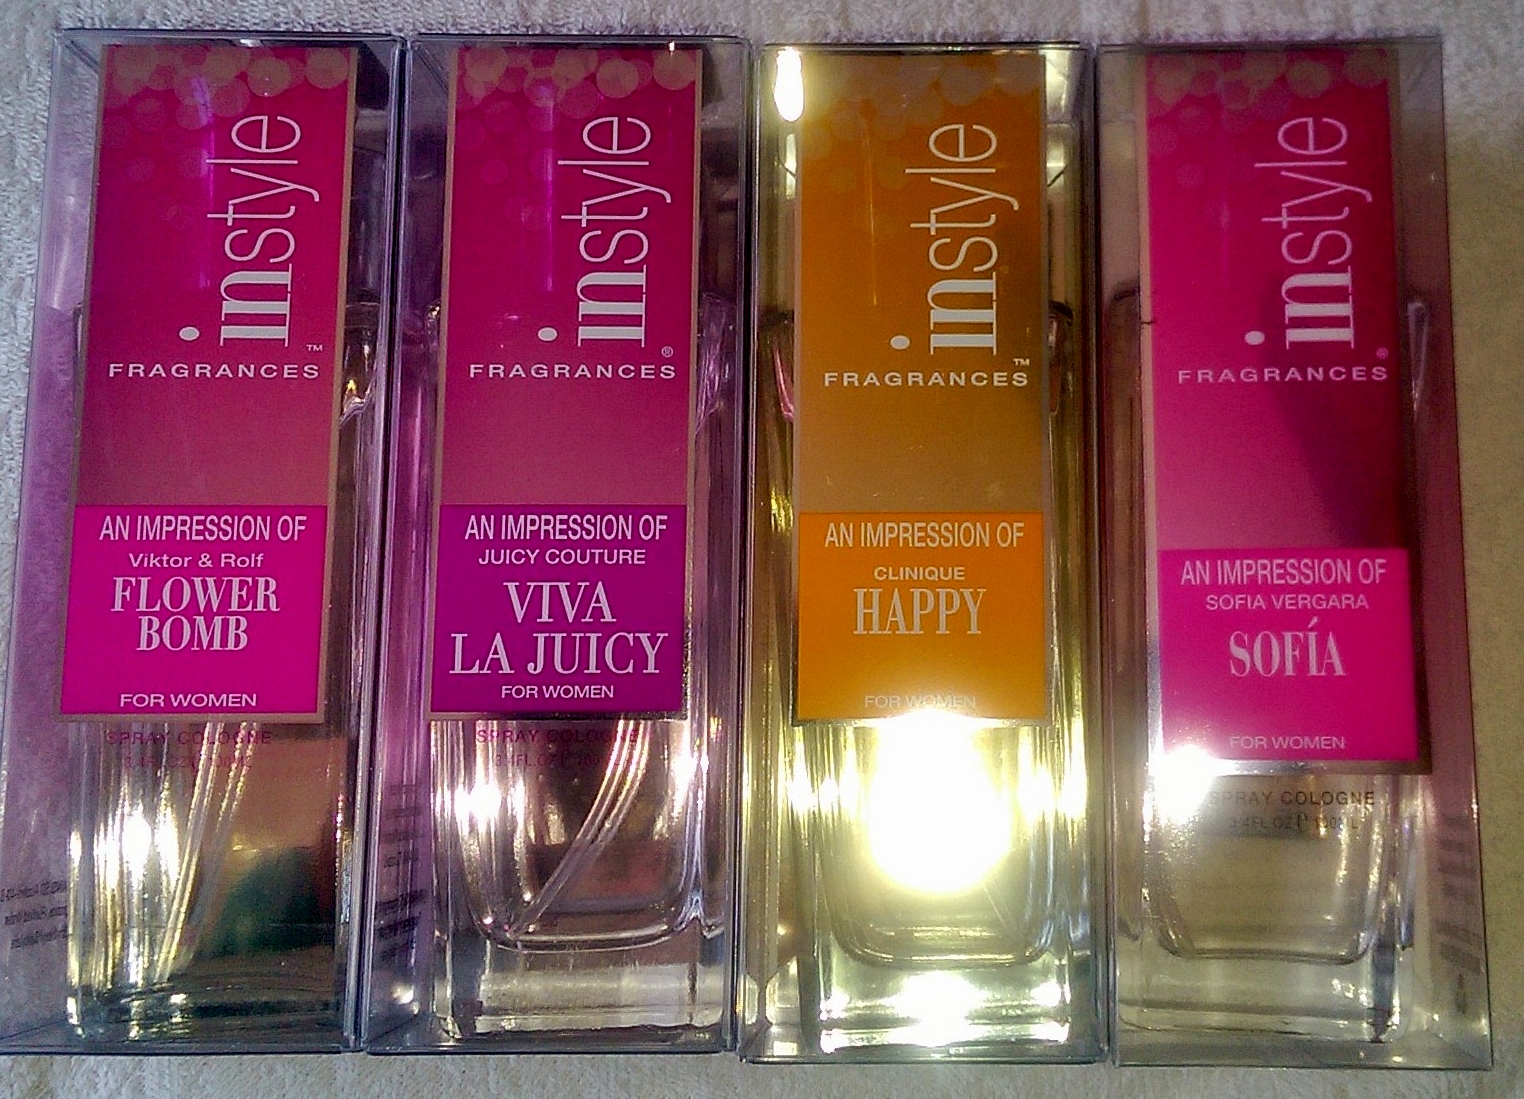 Dollar . Store . Makeup . Hauls: review INSTYLE fragrances at Walgreens